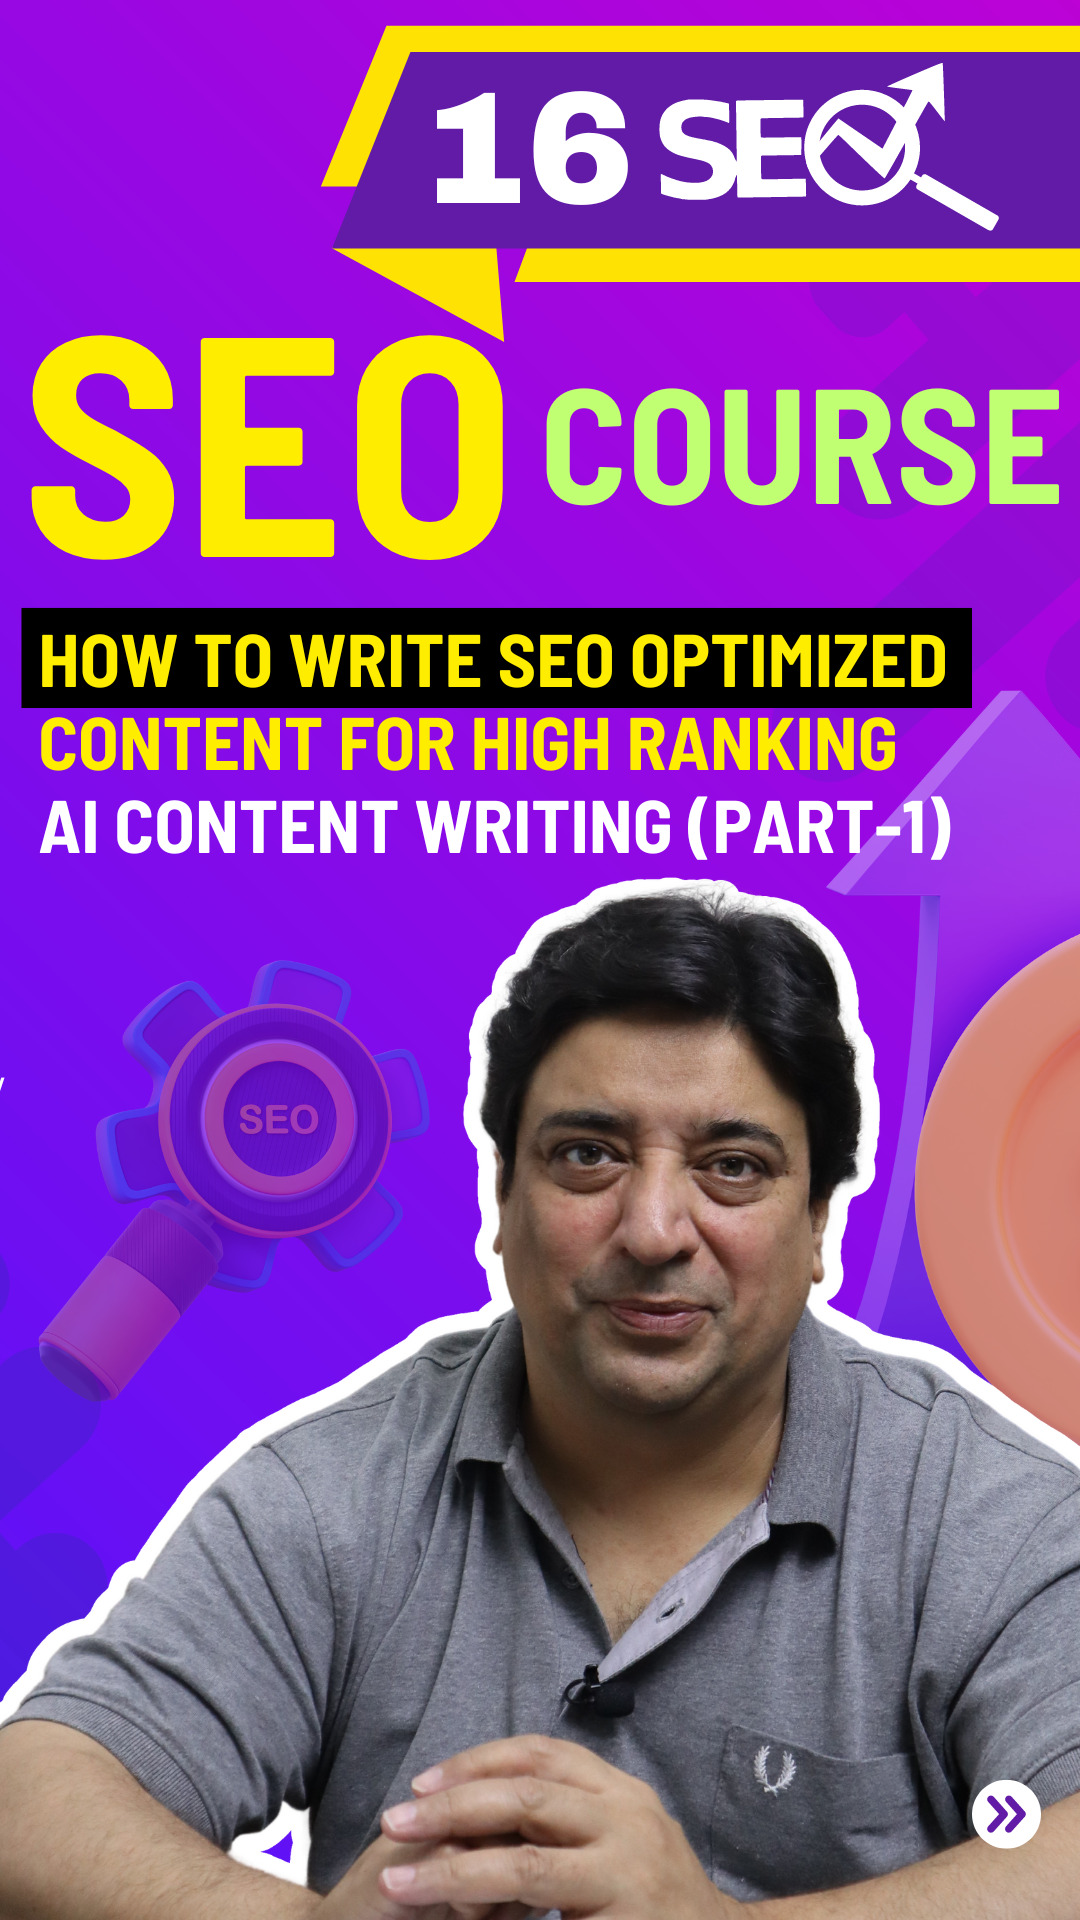 How to write SEO optimized content for high ranking AI content writing